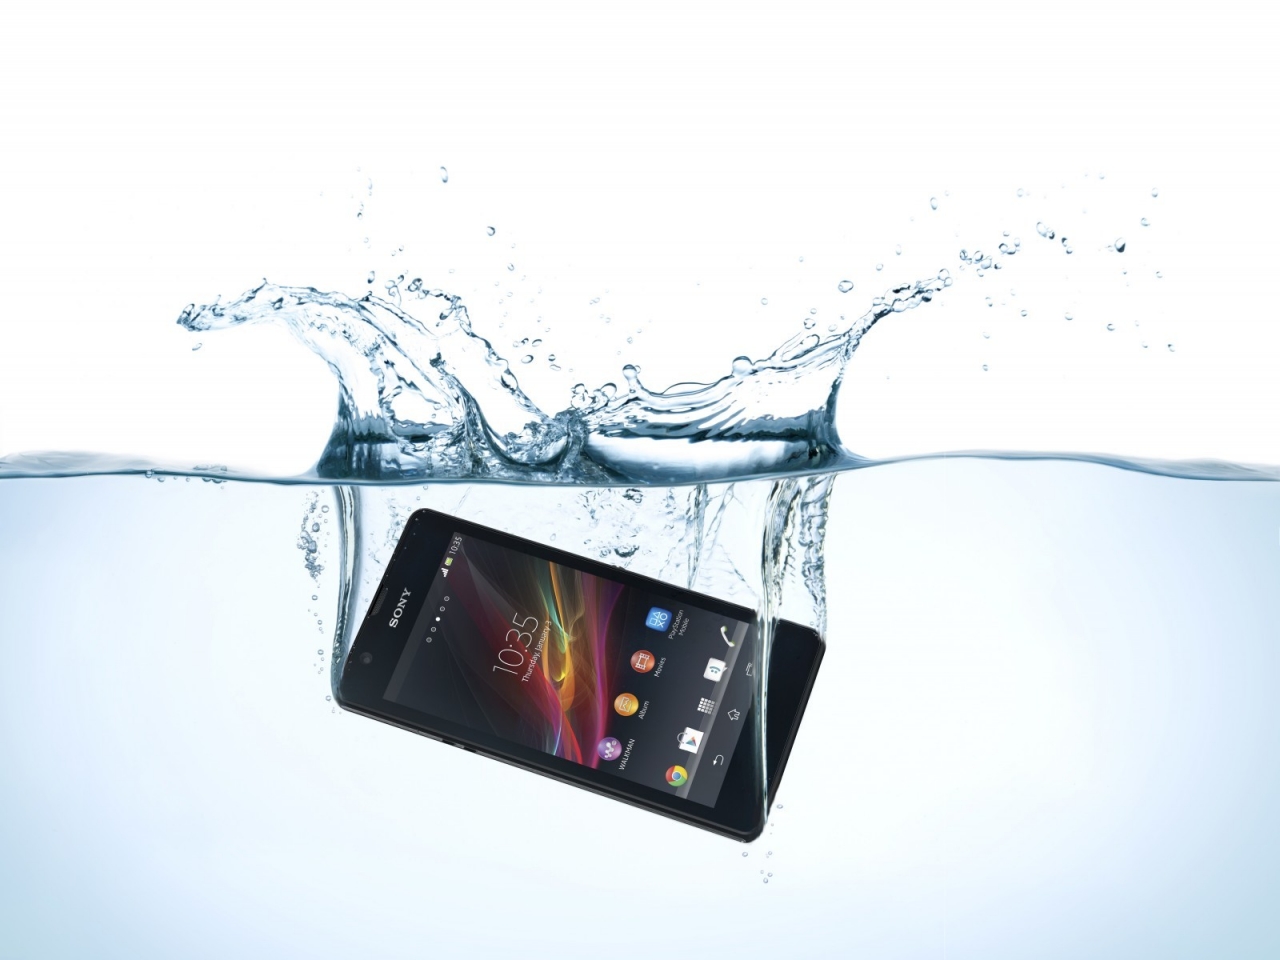 Sony Xperia Swimming for 1280 x 960 resolution